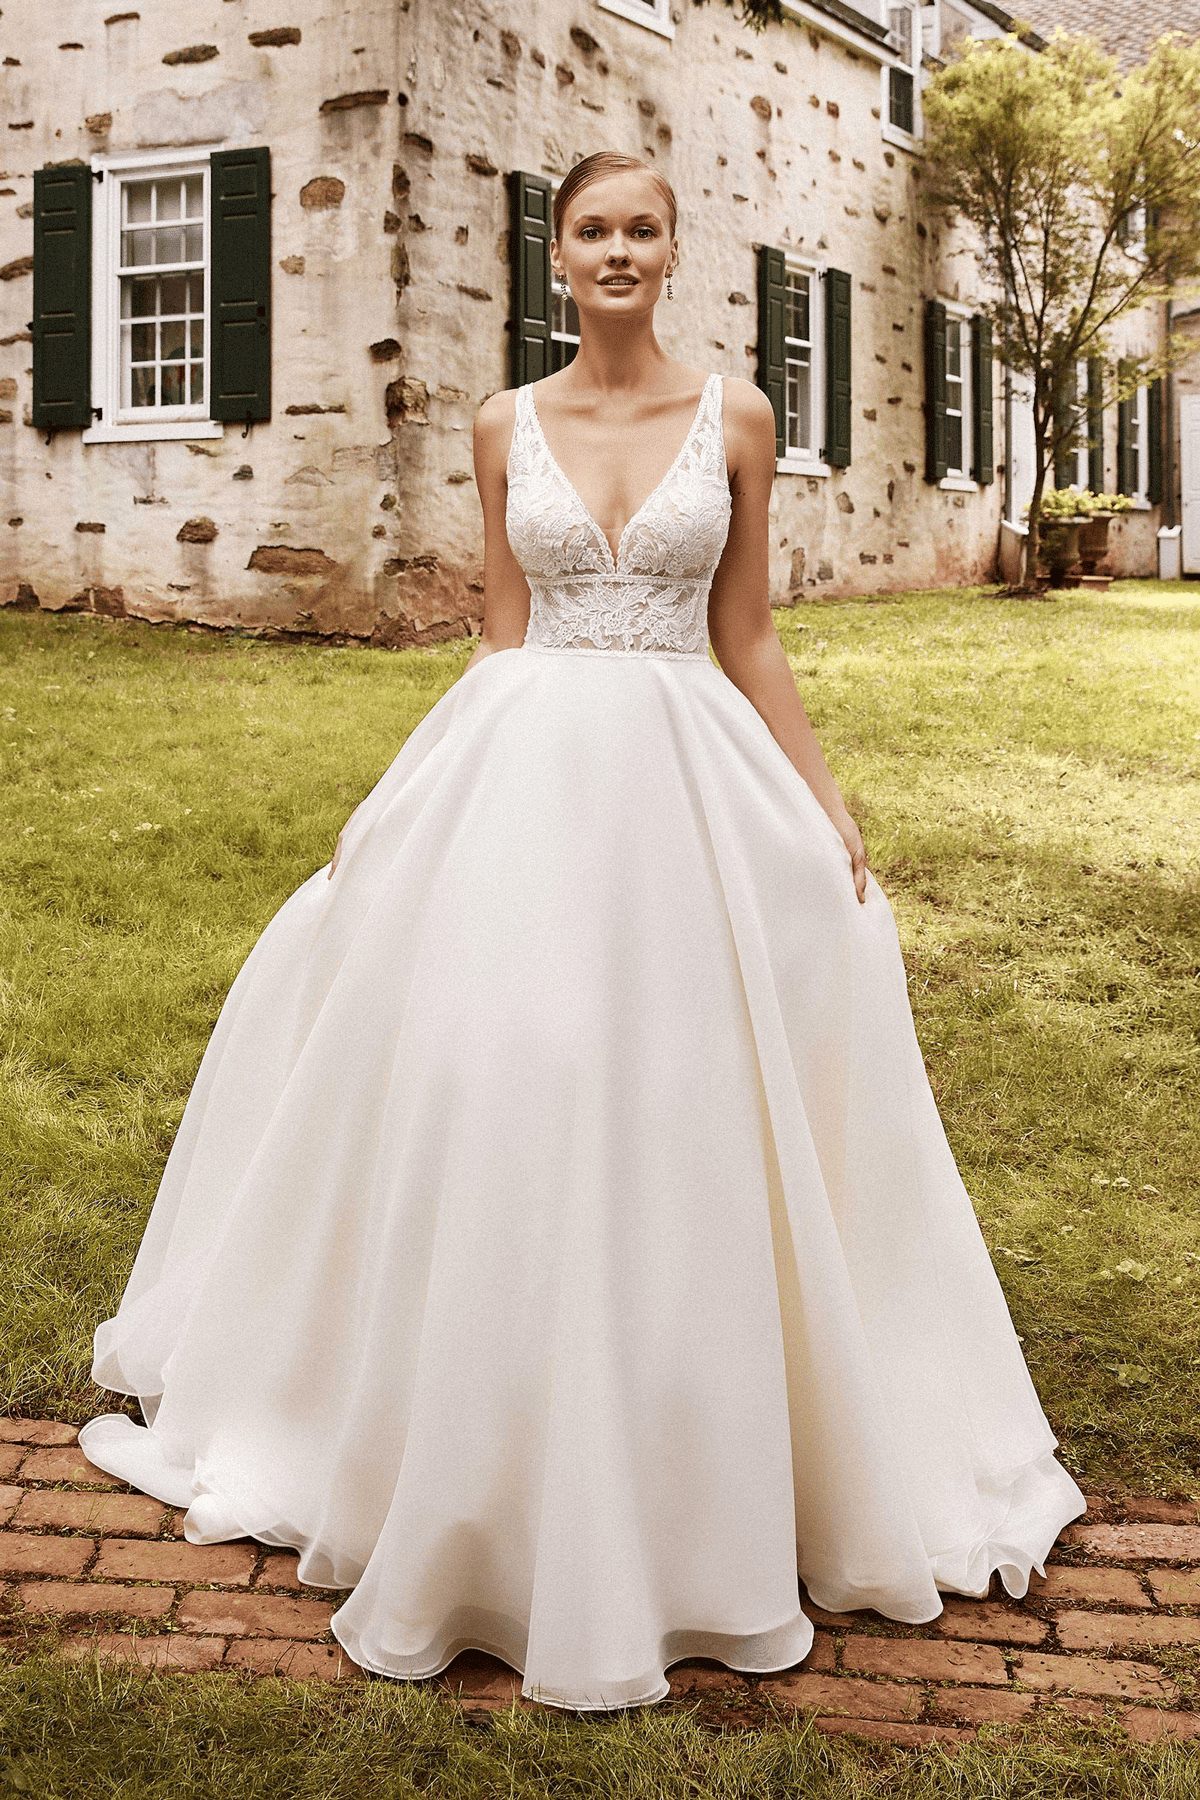 15 Best Wedding Dress Shops Manchester - hitched.co.uk - hitched.co.uk